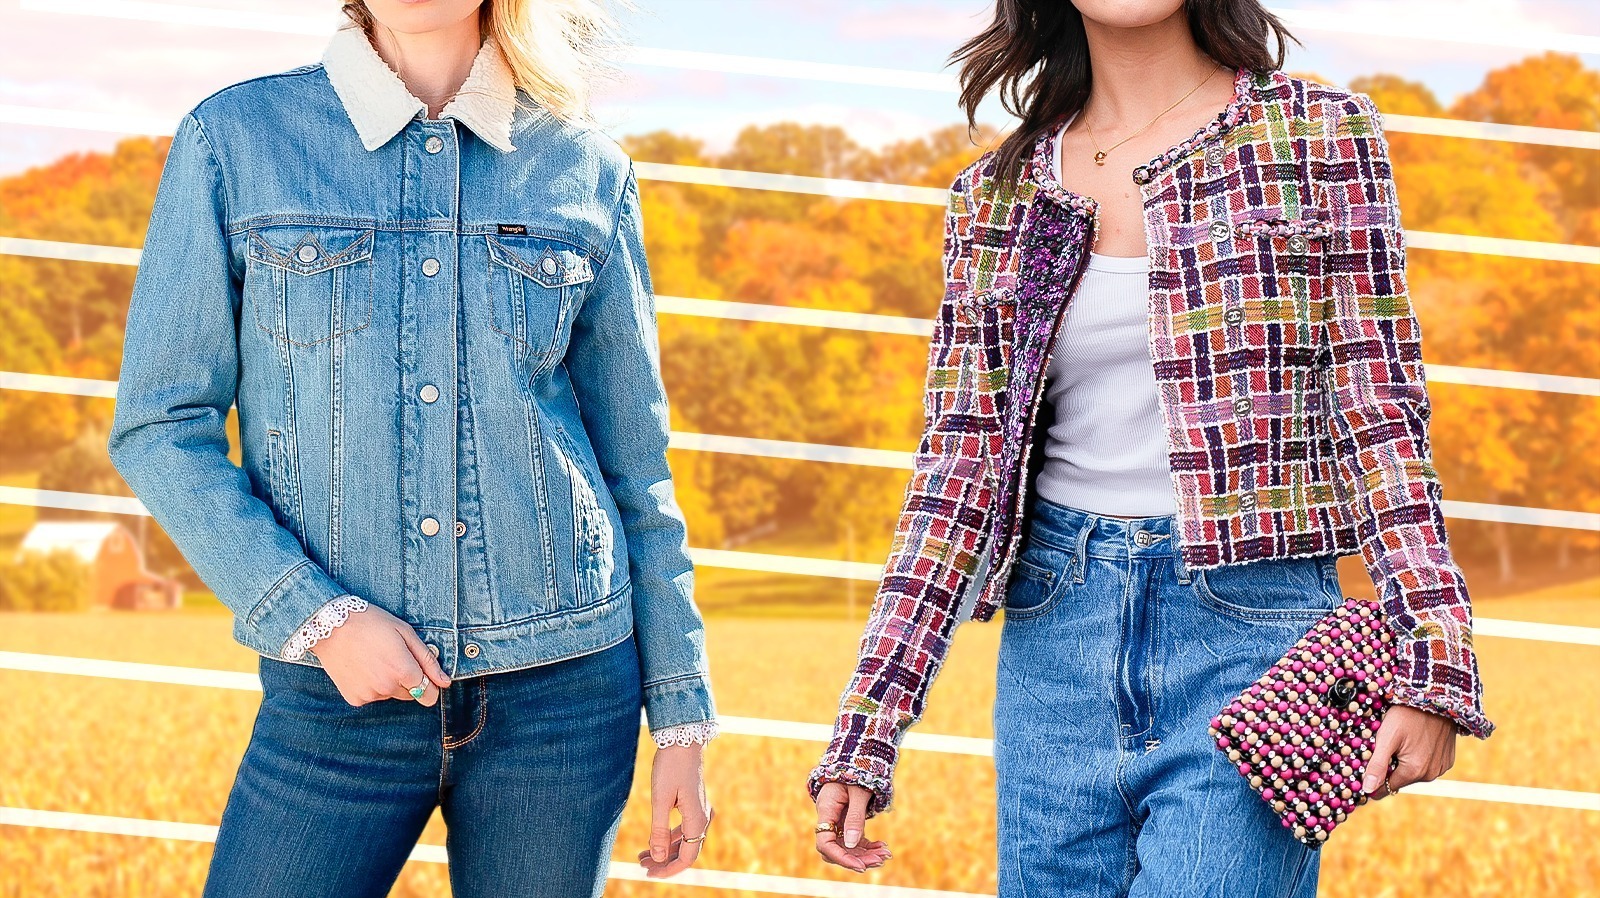 https://www.glam.com/img/gallery/casual-trucker-jackets-are-outdated-for-sophisticated-fall-2023-trends-what-to-wear-instead/l-intro-1697556656.jpg